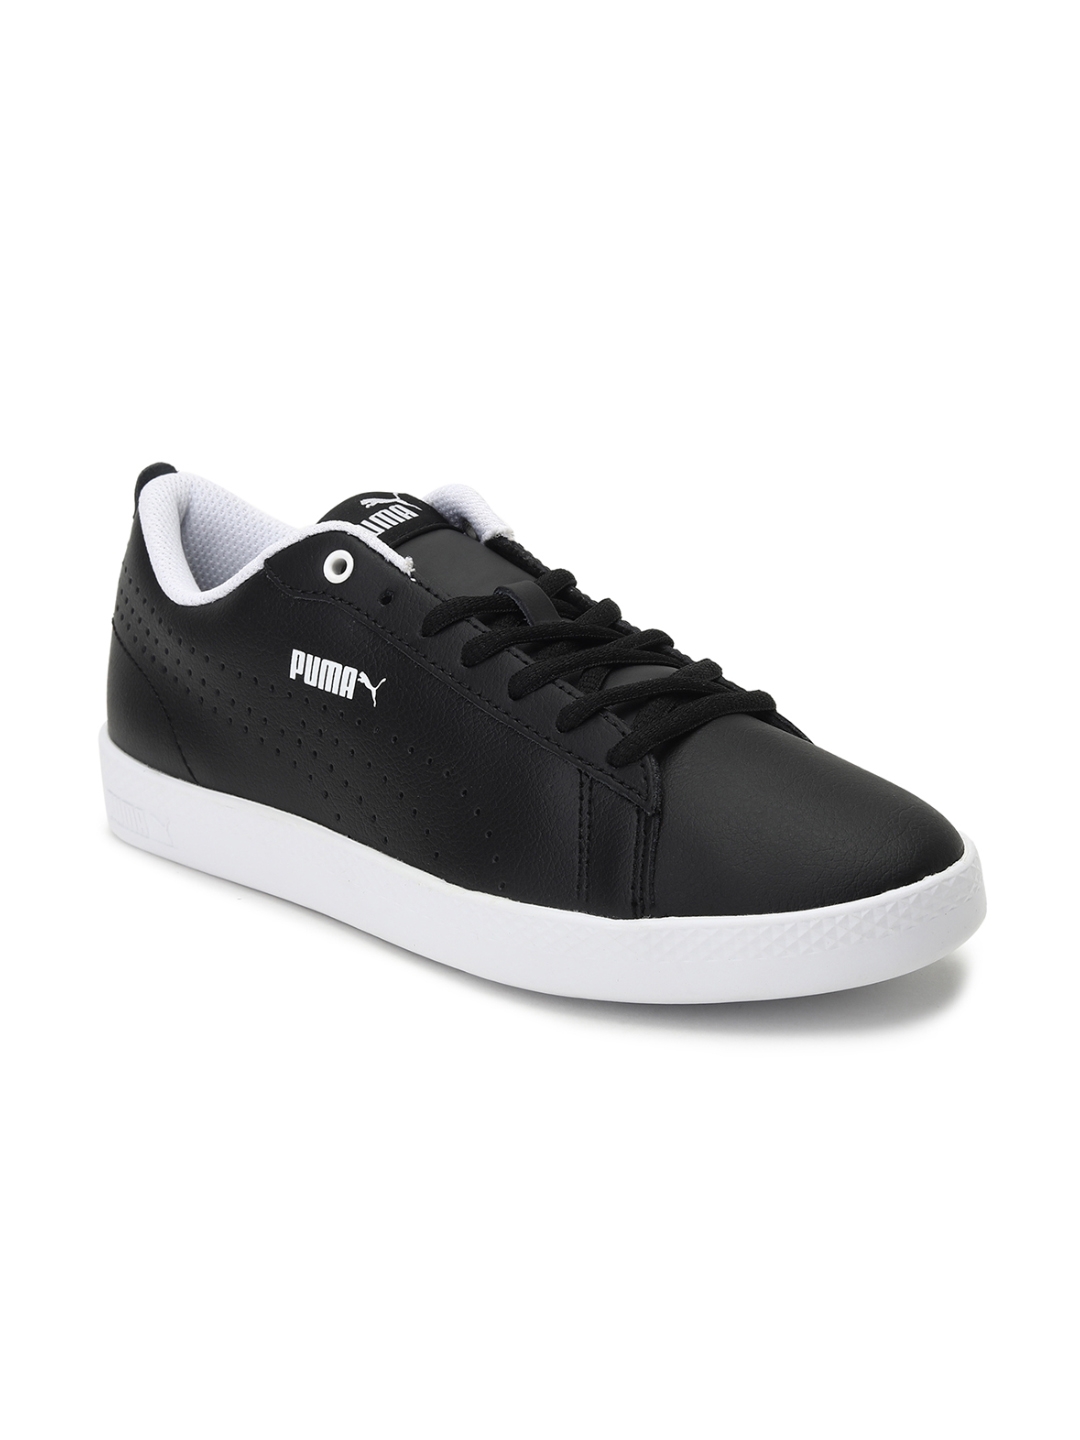 Puma | Smash Perf Leather Women's Sneakers 0